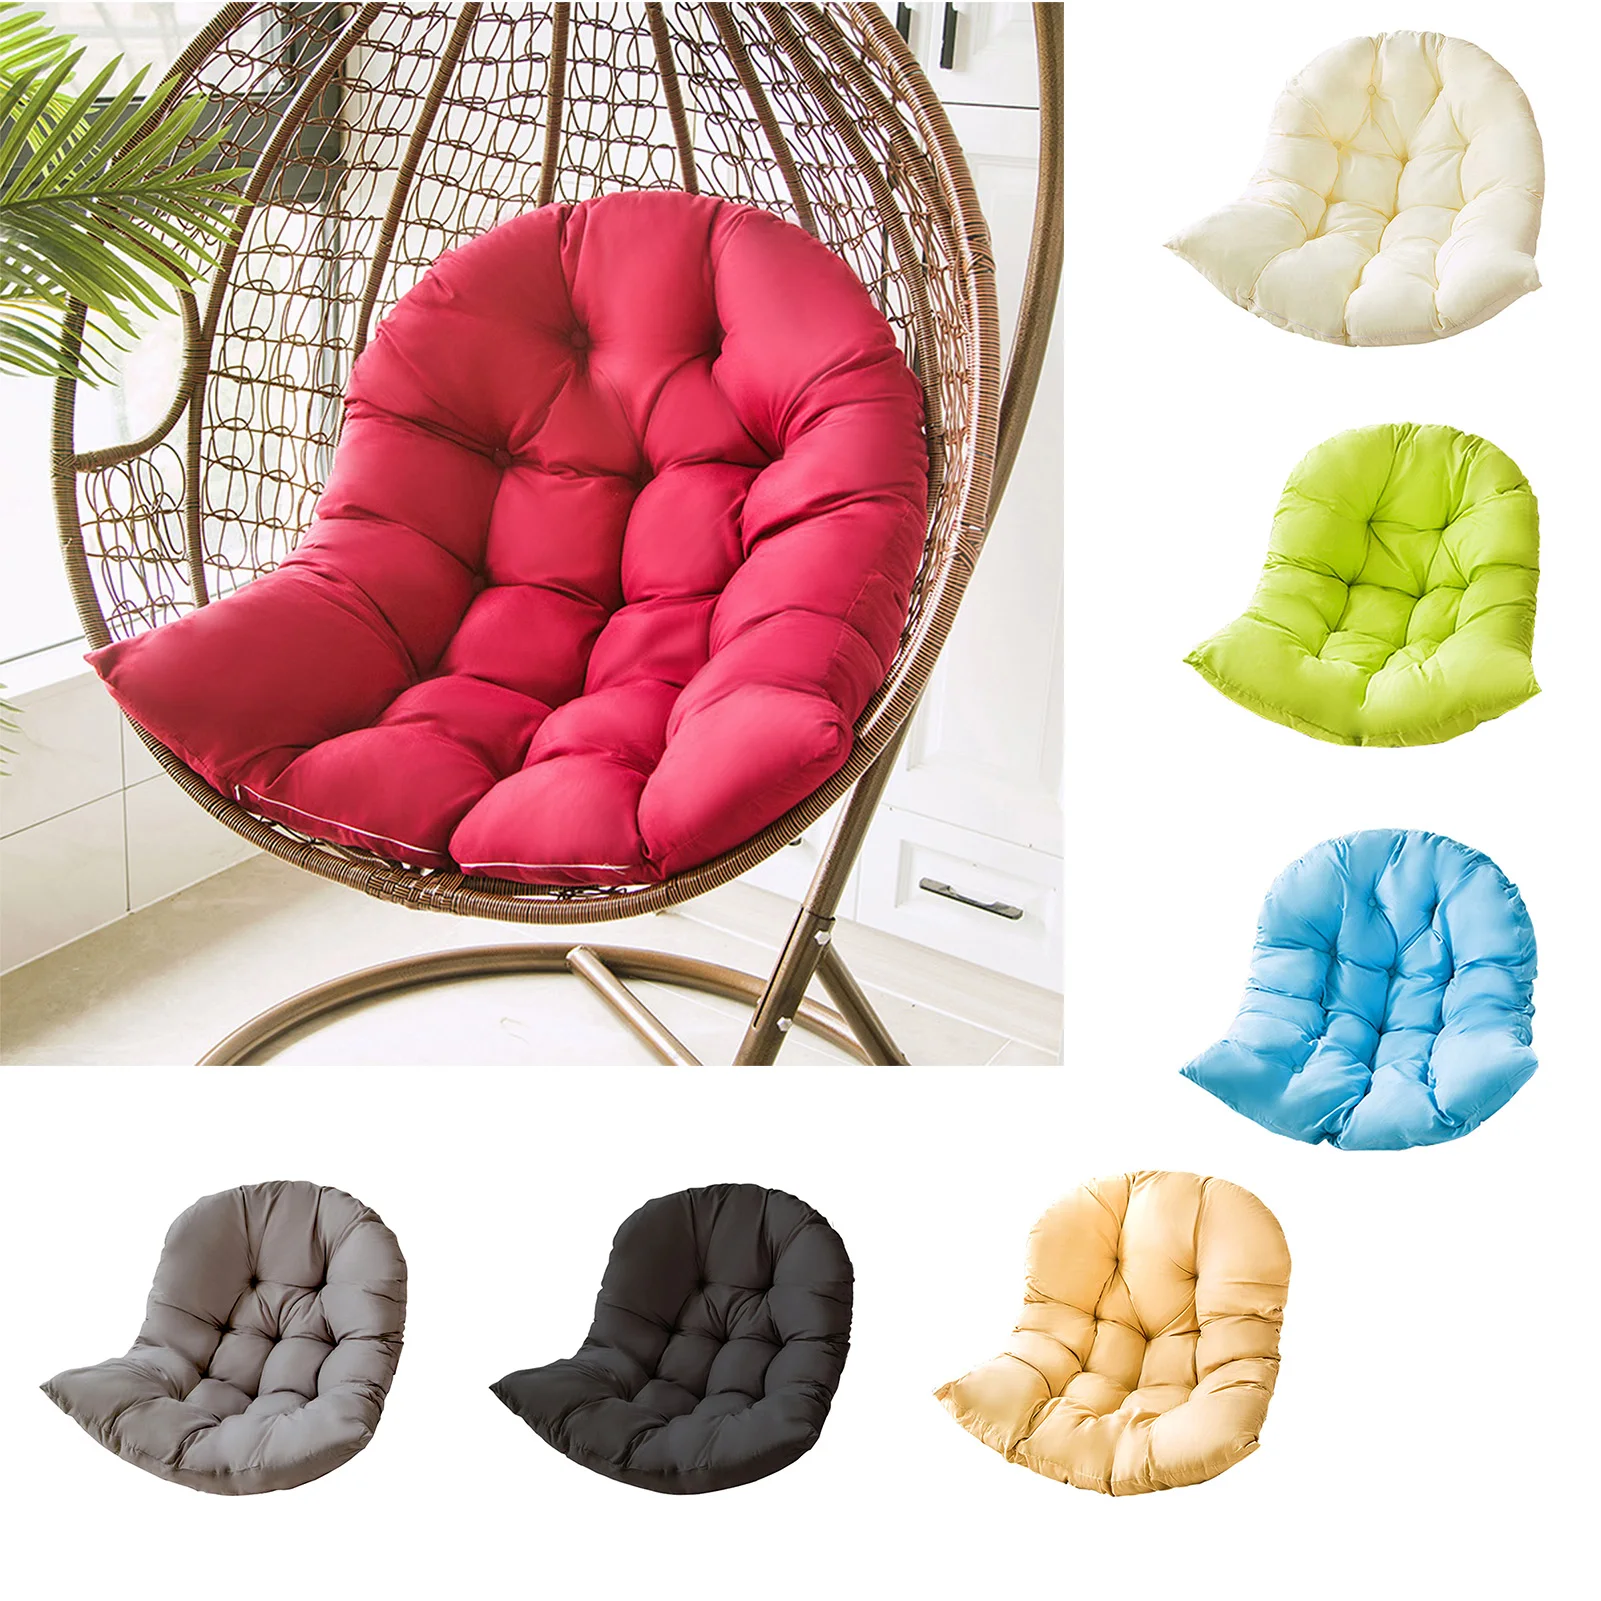 Single Seat Cushion For Hanging Swing Chair Washable Soft Thicken Comfortable Back Cushion For Indoor Outdoor Egg Swing Chair